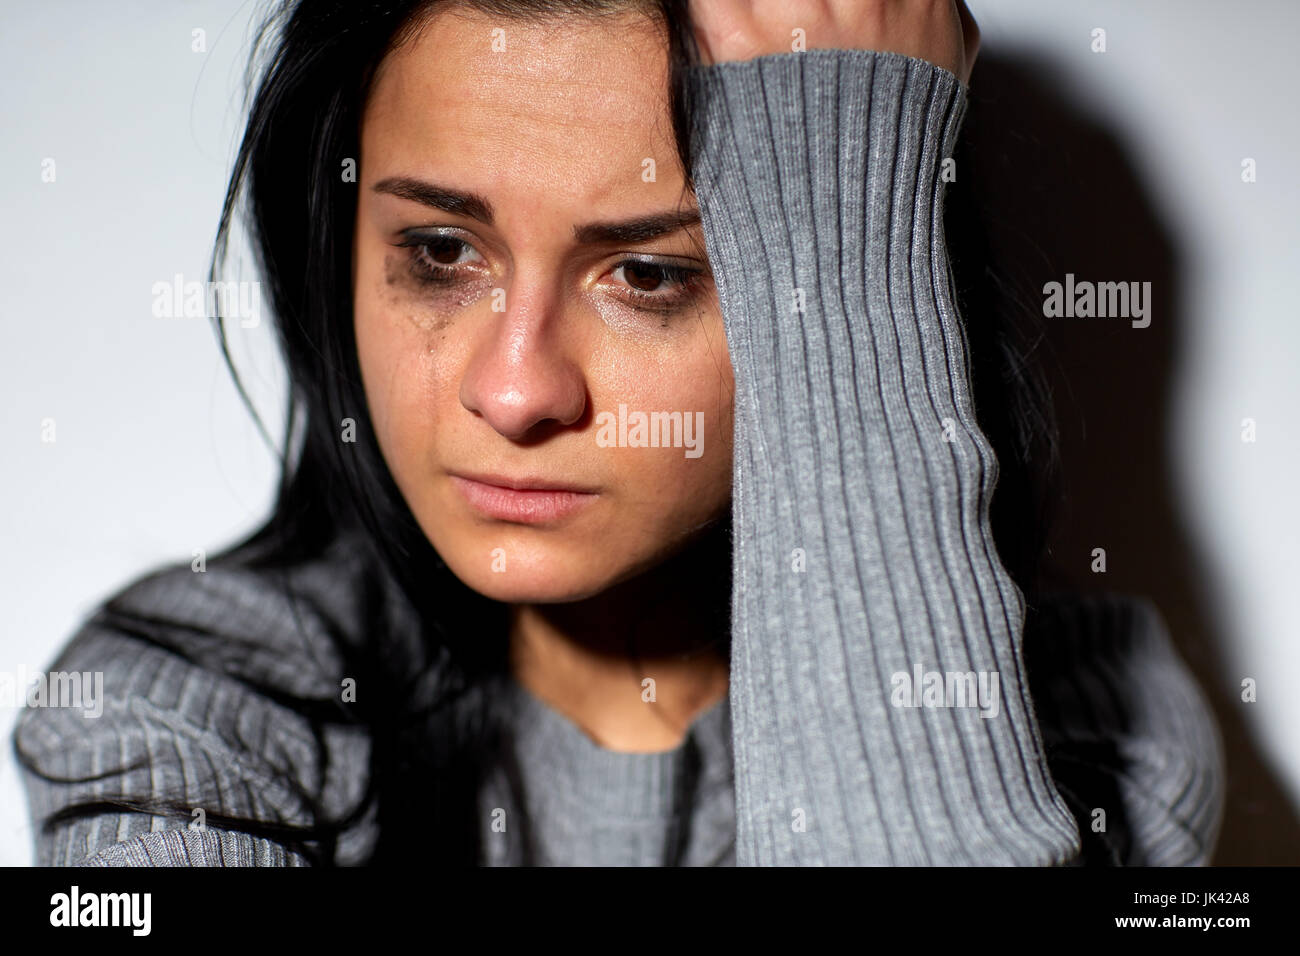 close up of unhappy crying woman Stock Photo